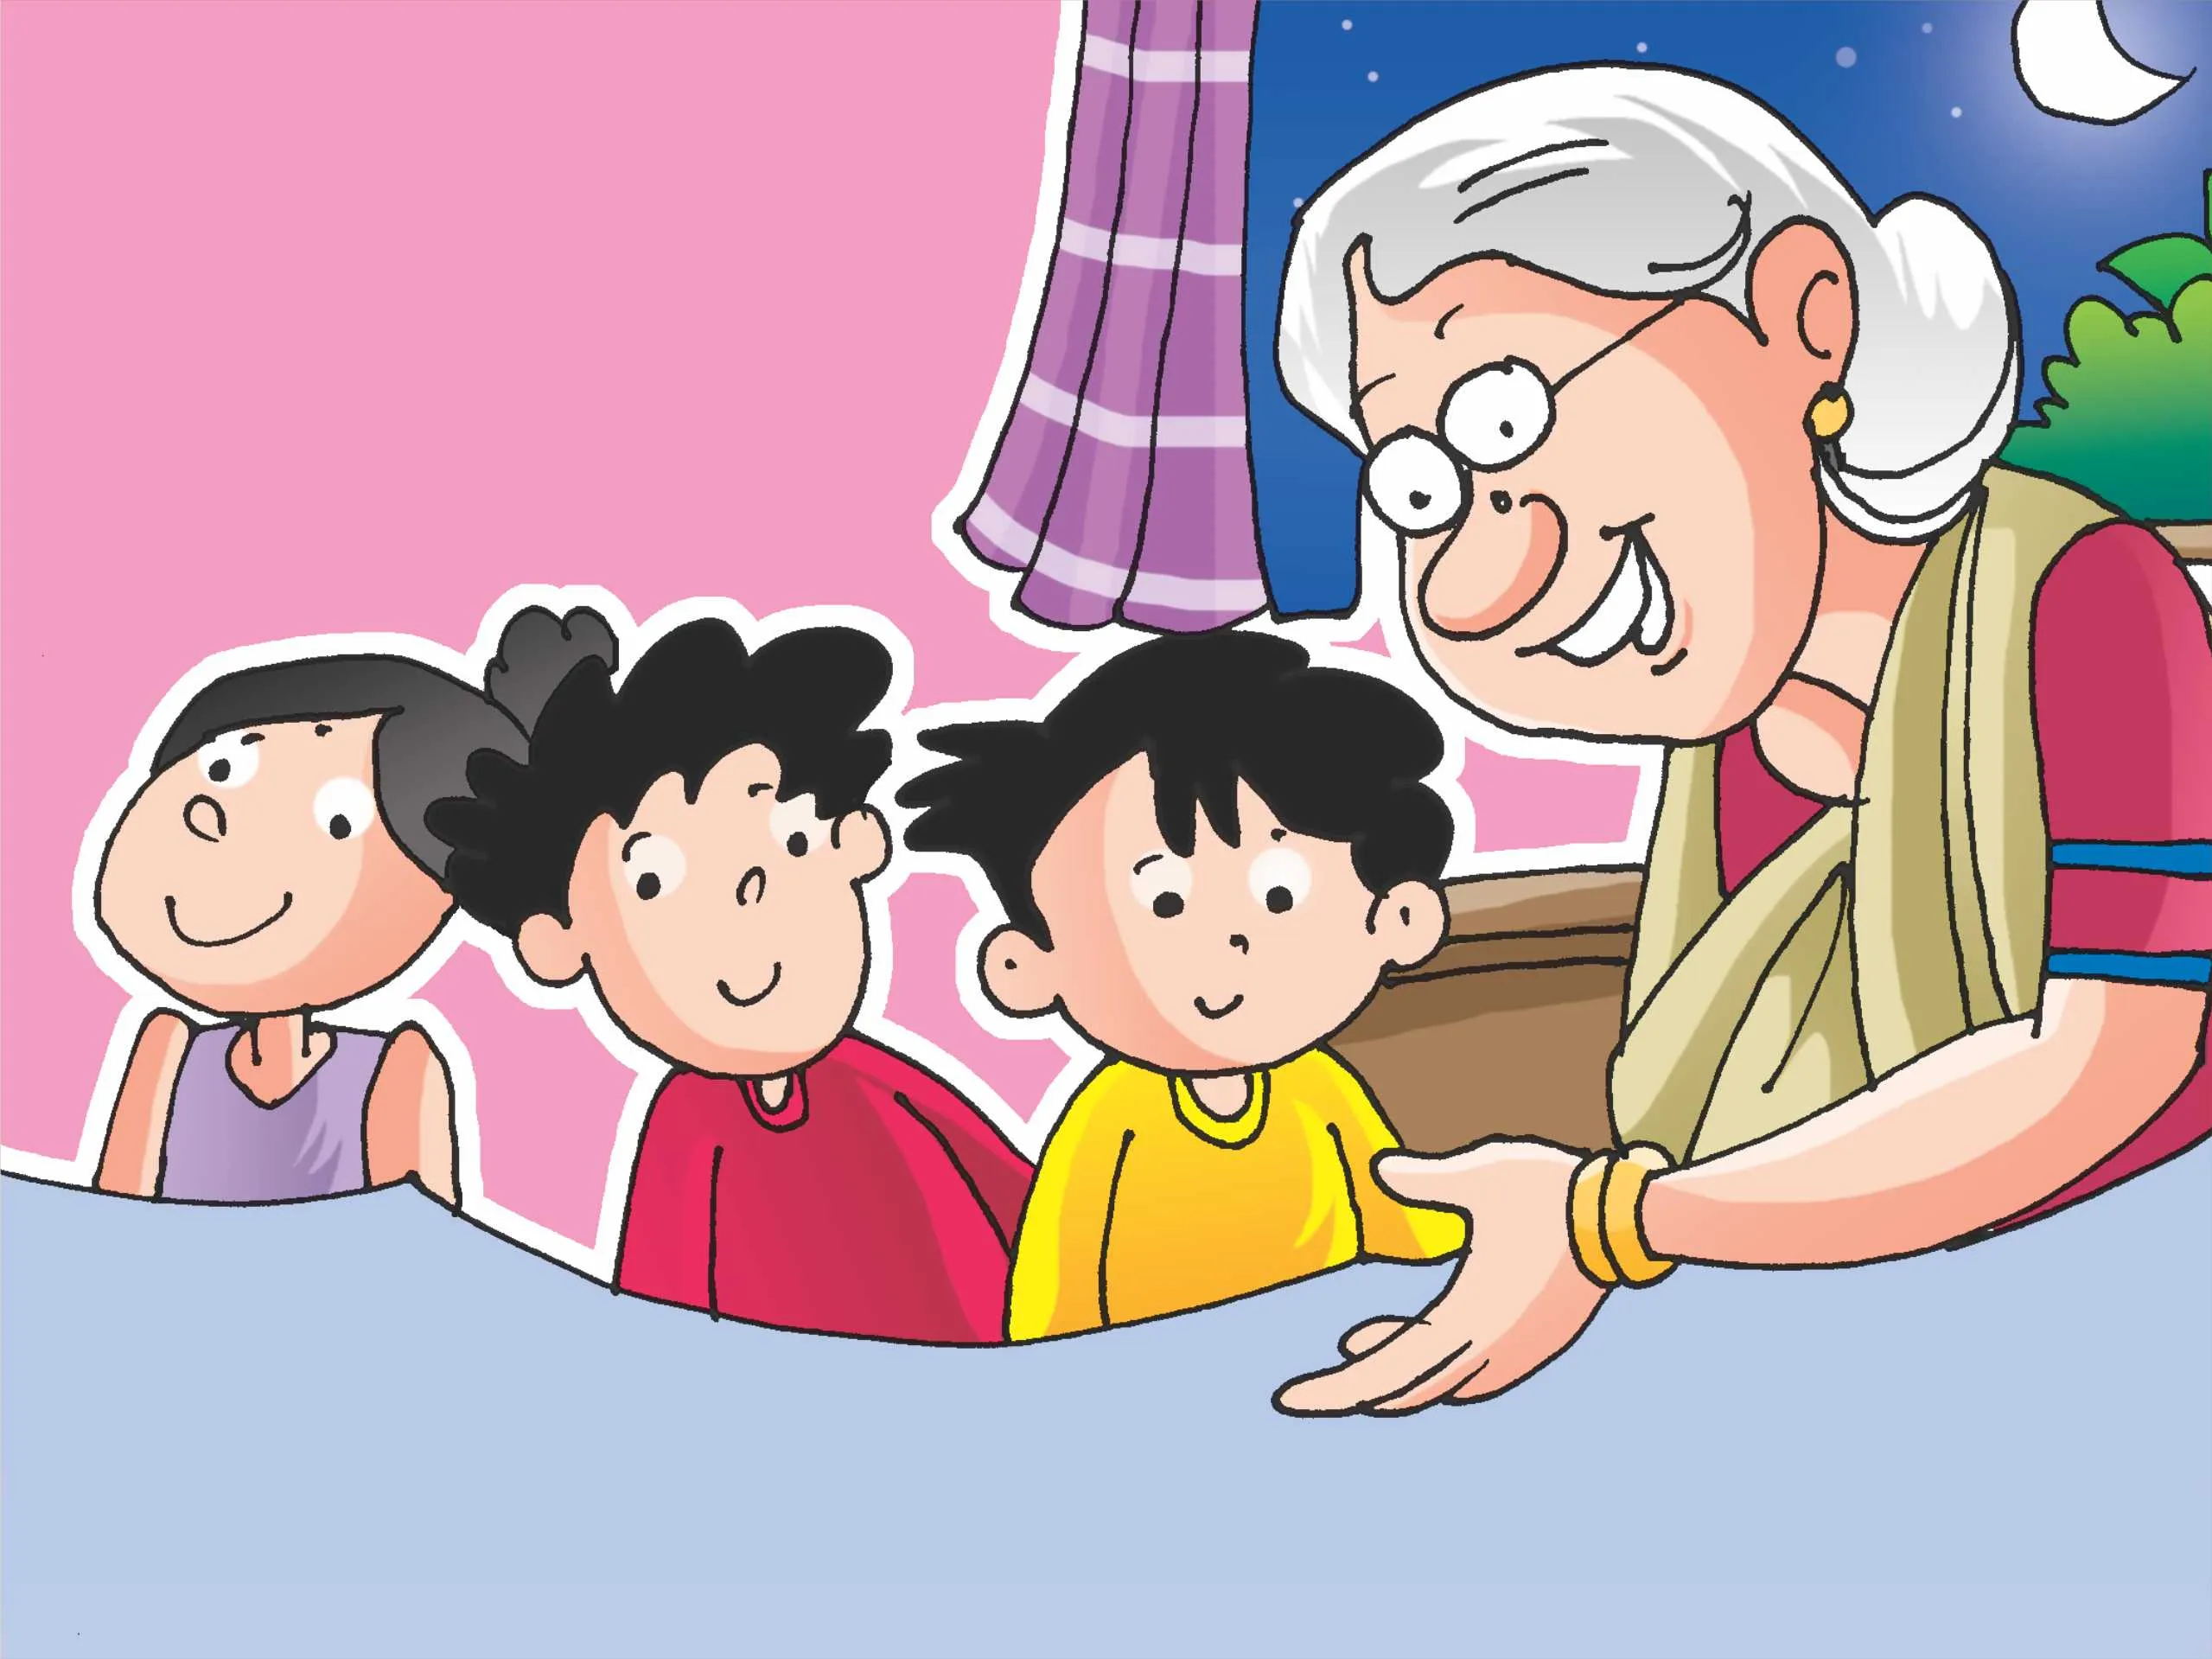 Grandmother with kids cartoon images